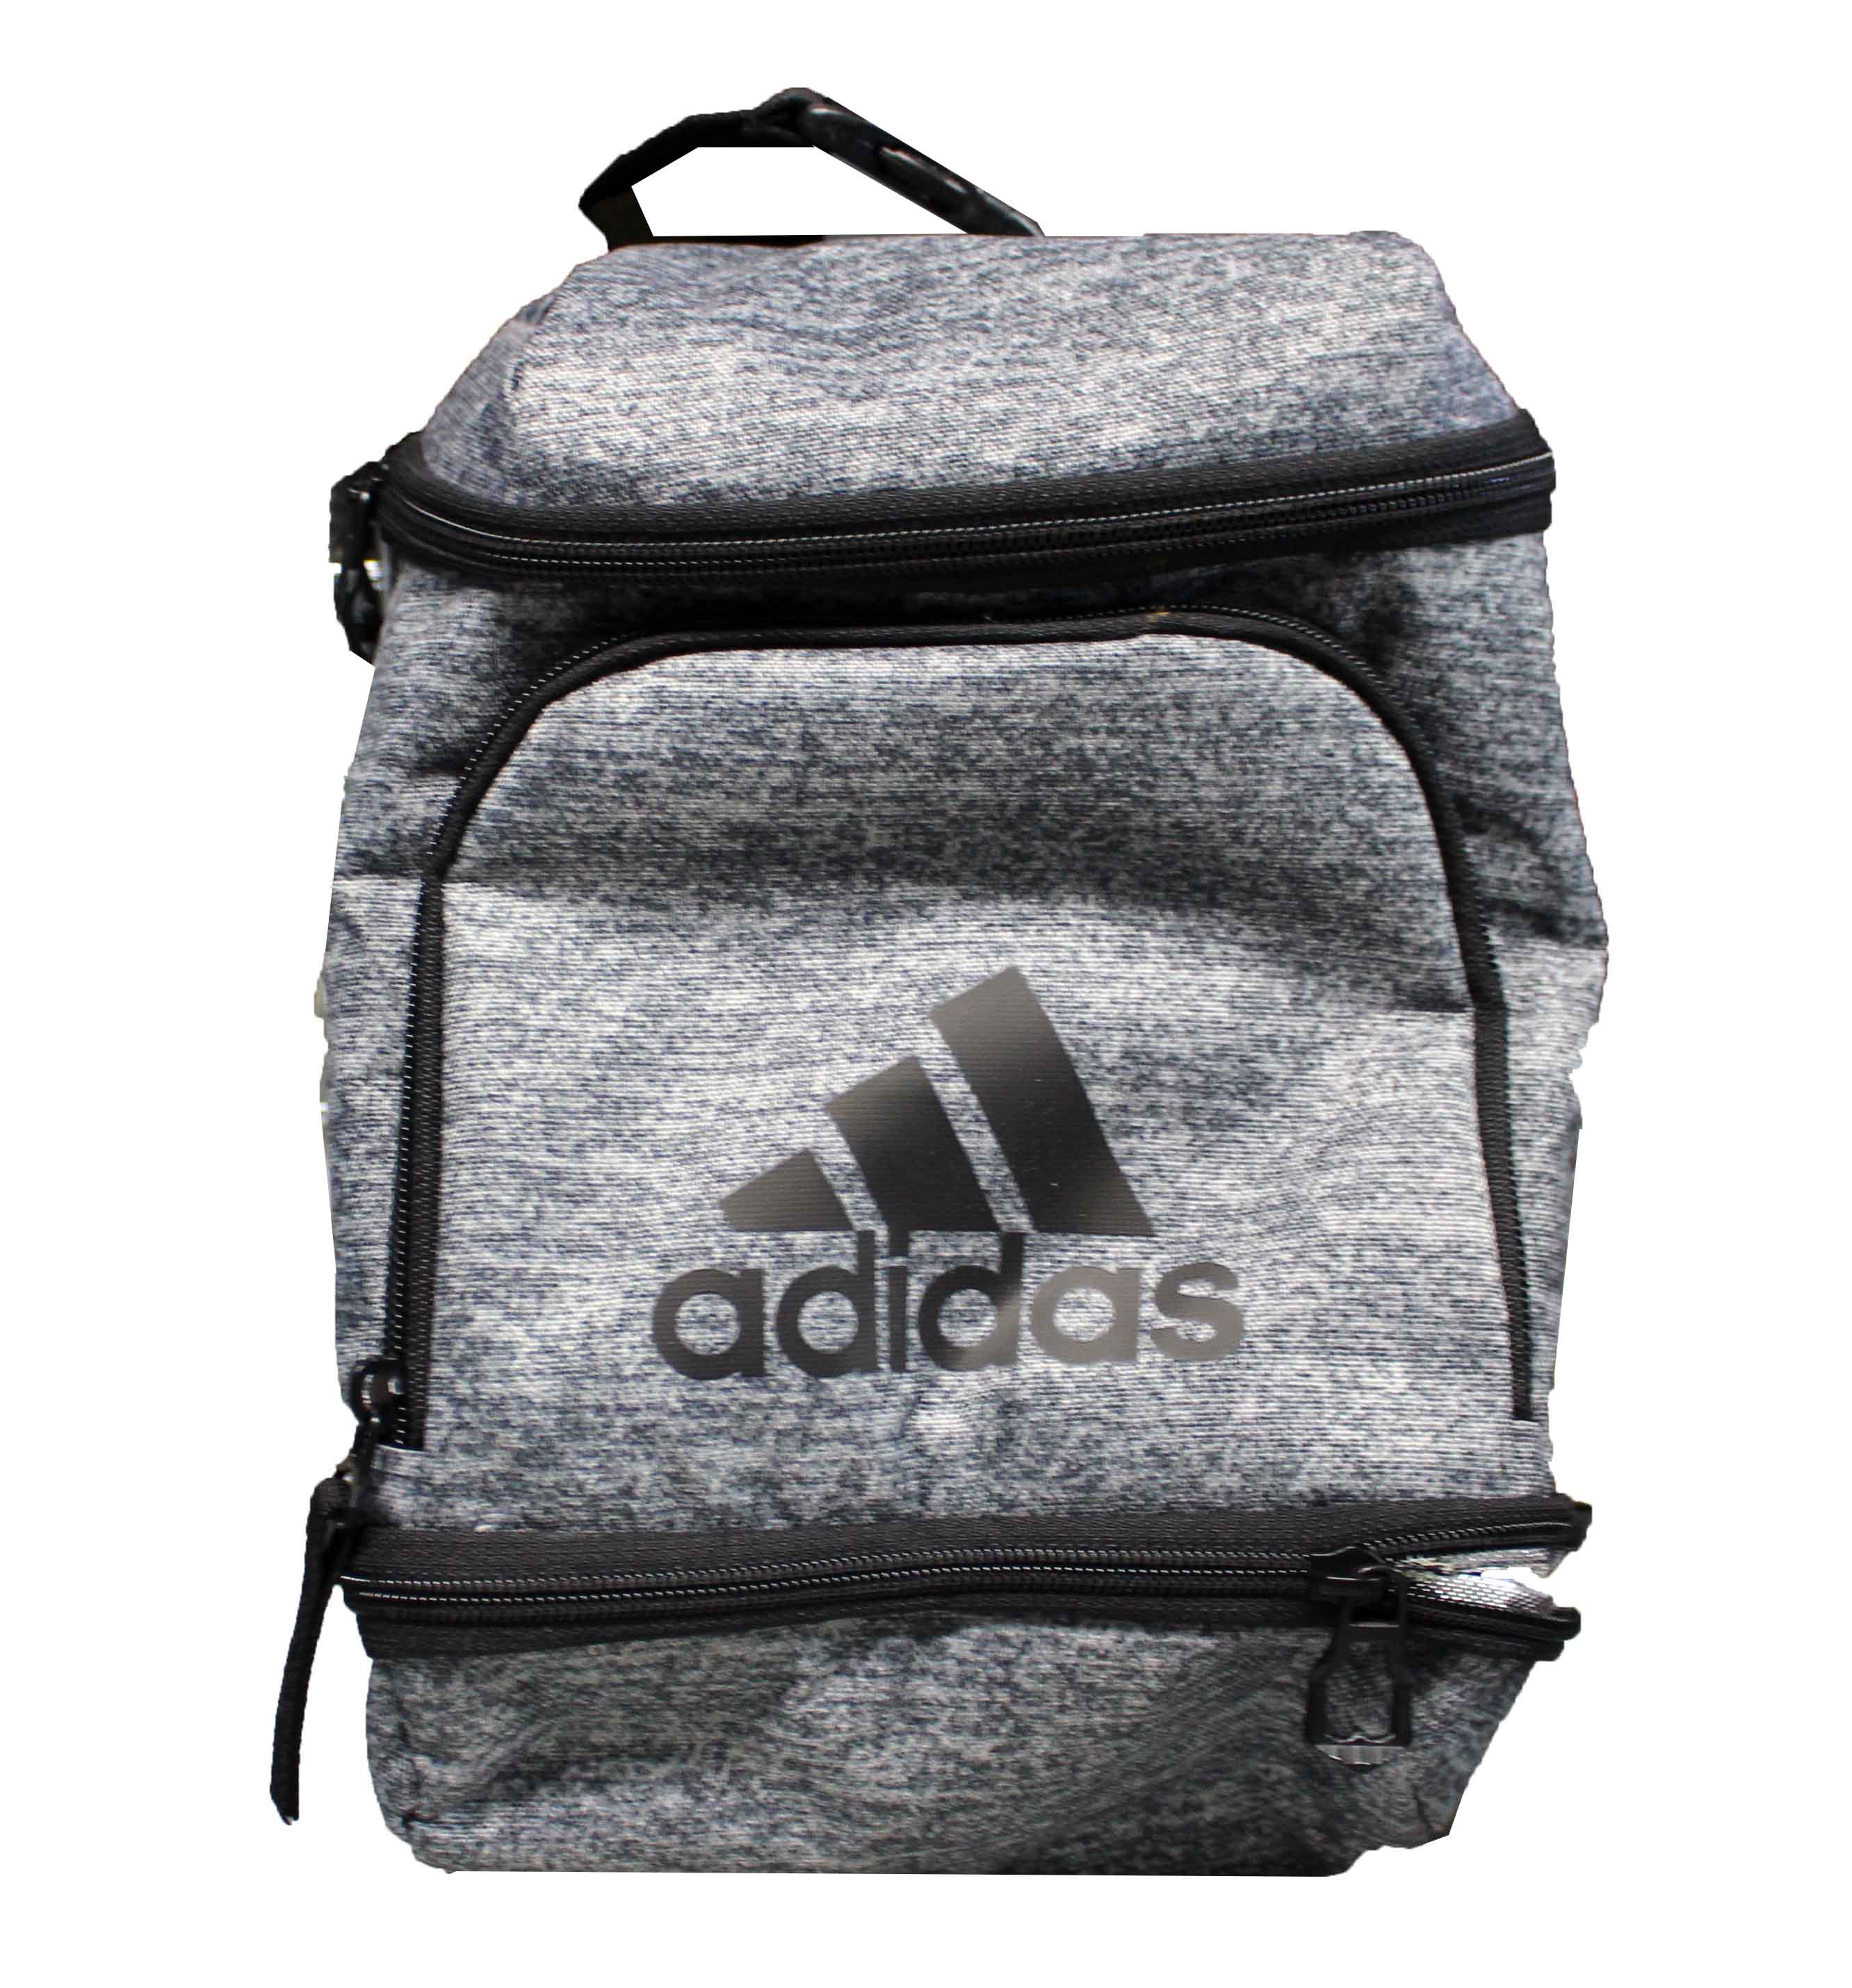 Adidas Insulated Lunch Bag 3 Zippered Compartments Gray - image 1 of 3